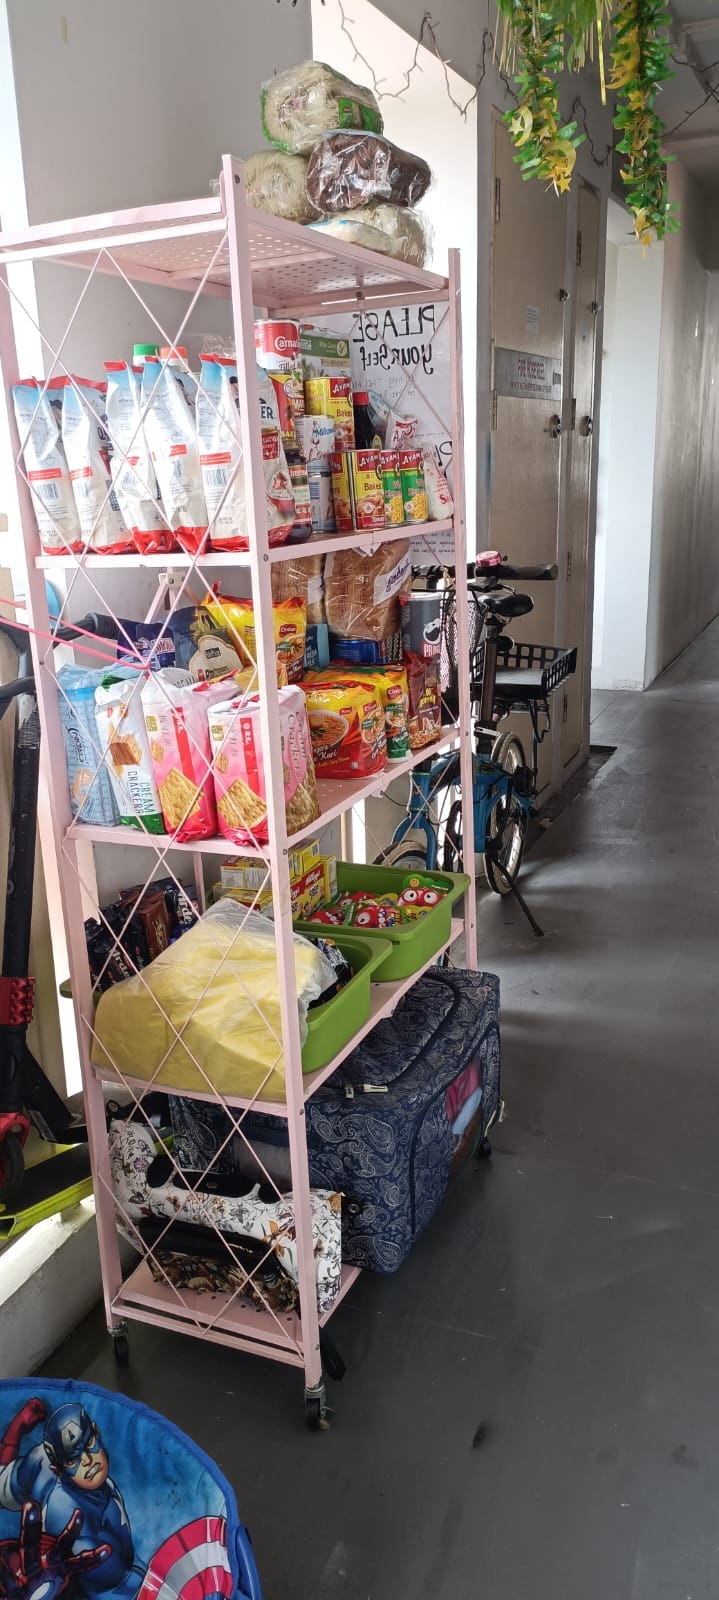 Choa Chu Kang resident leaves free kitchen essentials outside home for those in need during Ramadan